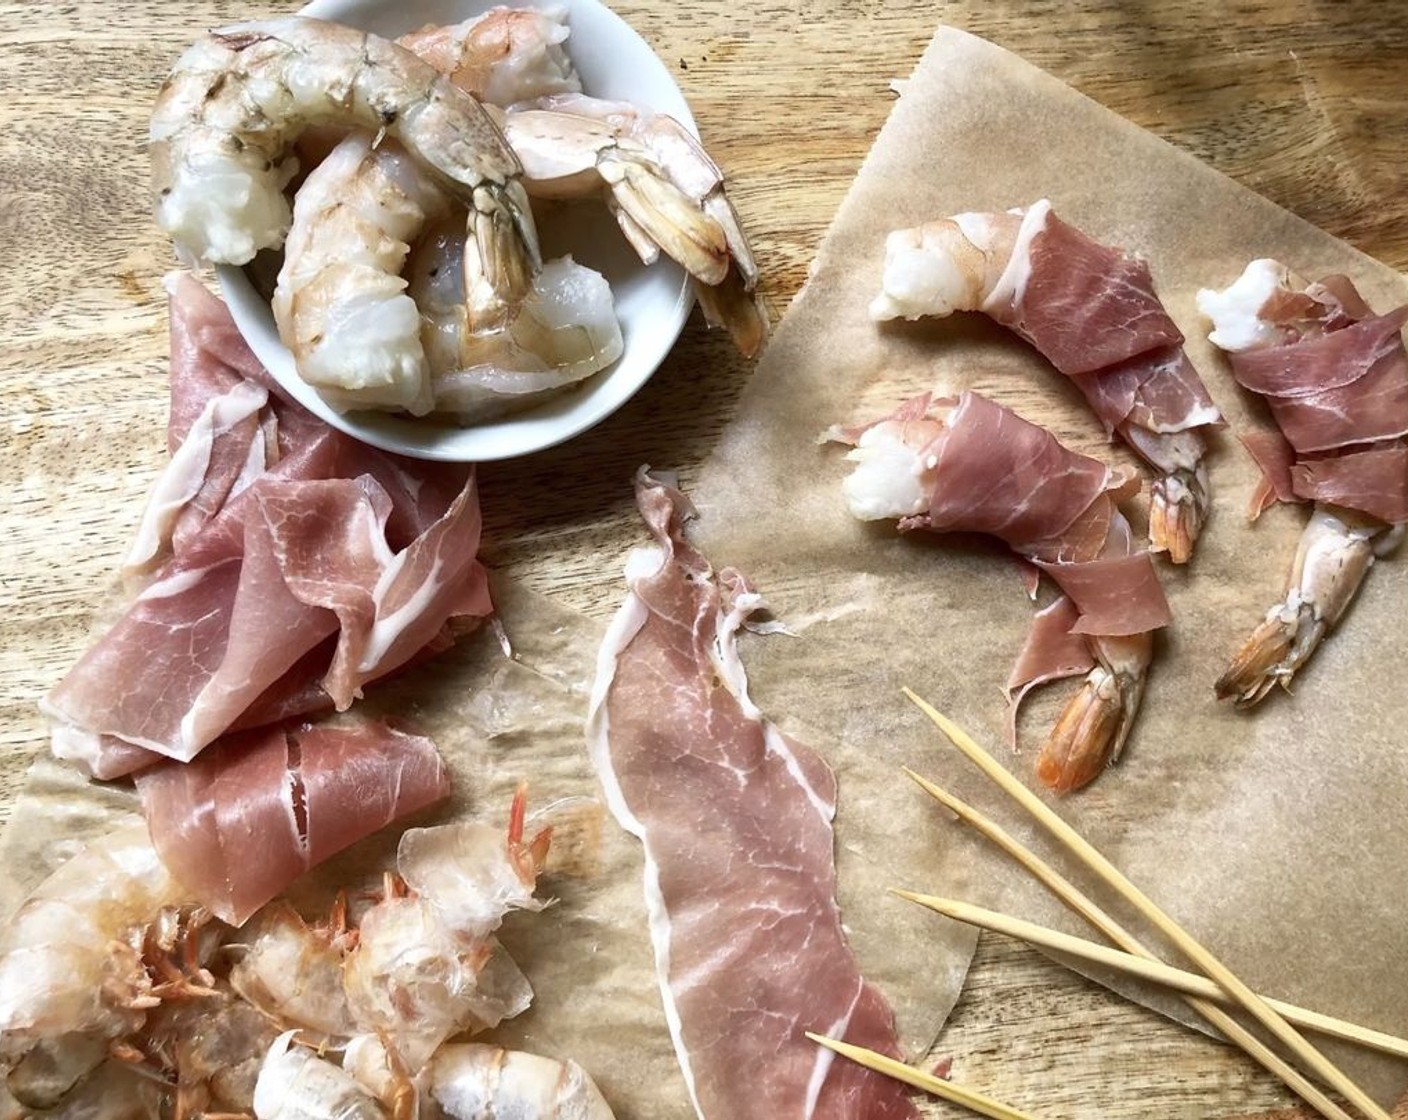 step 3 Wrap each cleaned Jumbo Shrimp (8) with a slice of Prosciutto (8 slices). Thread 2 wrapped shrimp on metal skewers or wooden skewers that have been soaked in water for about 10 minutes. Repeat with remaining shrimp.